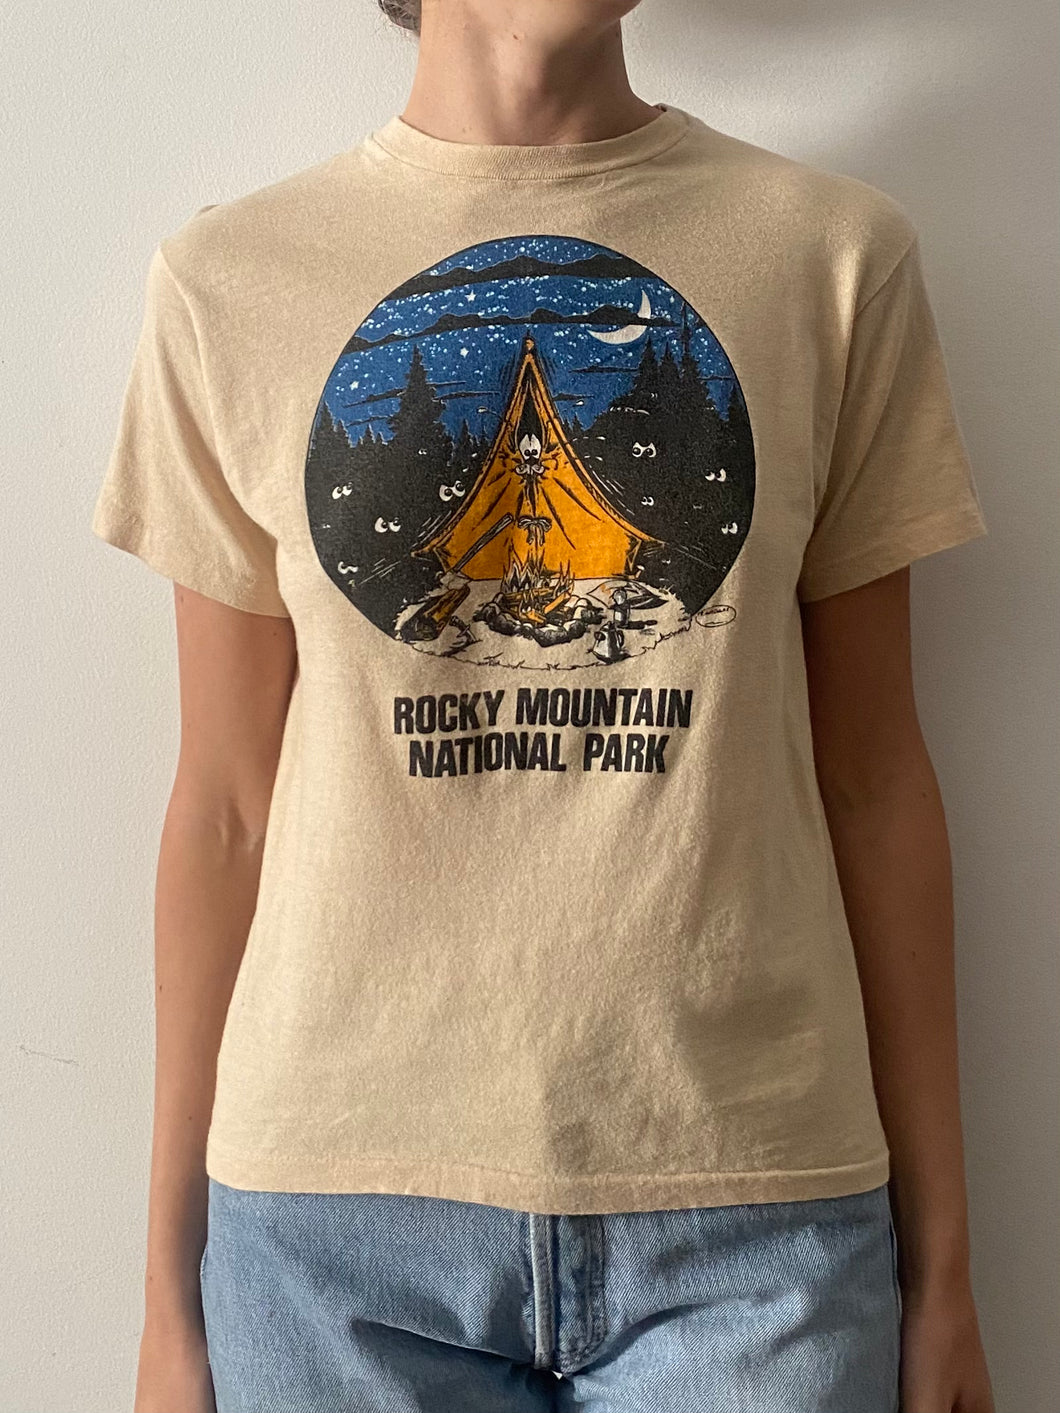 Rocky Mountain National Park Camping tee